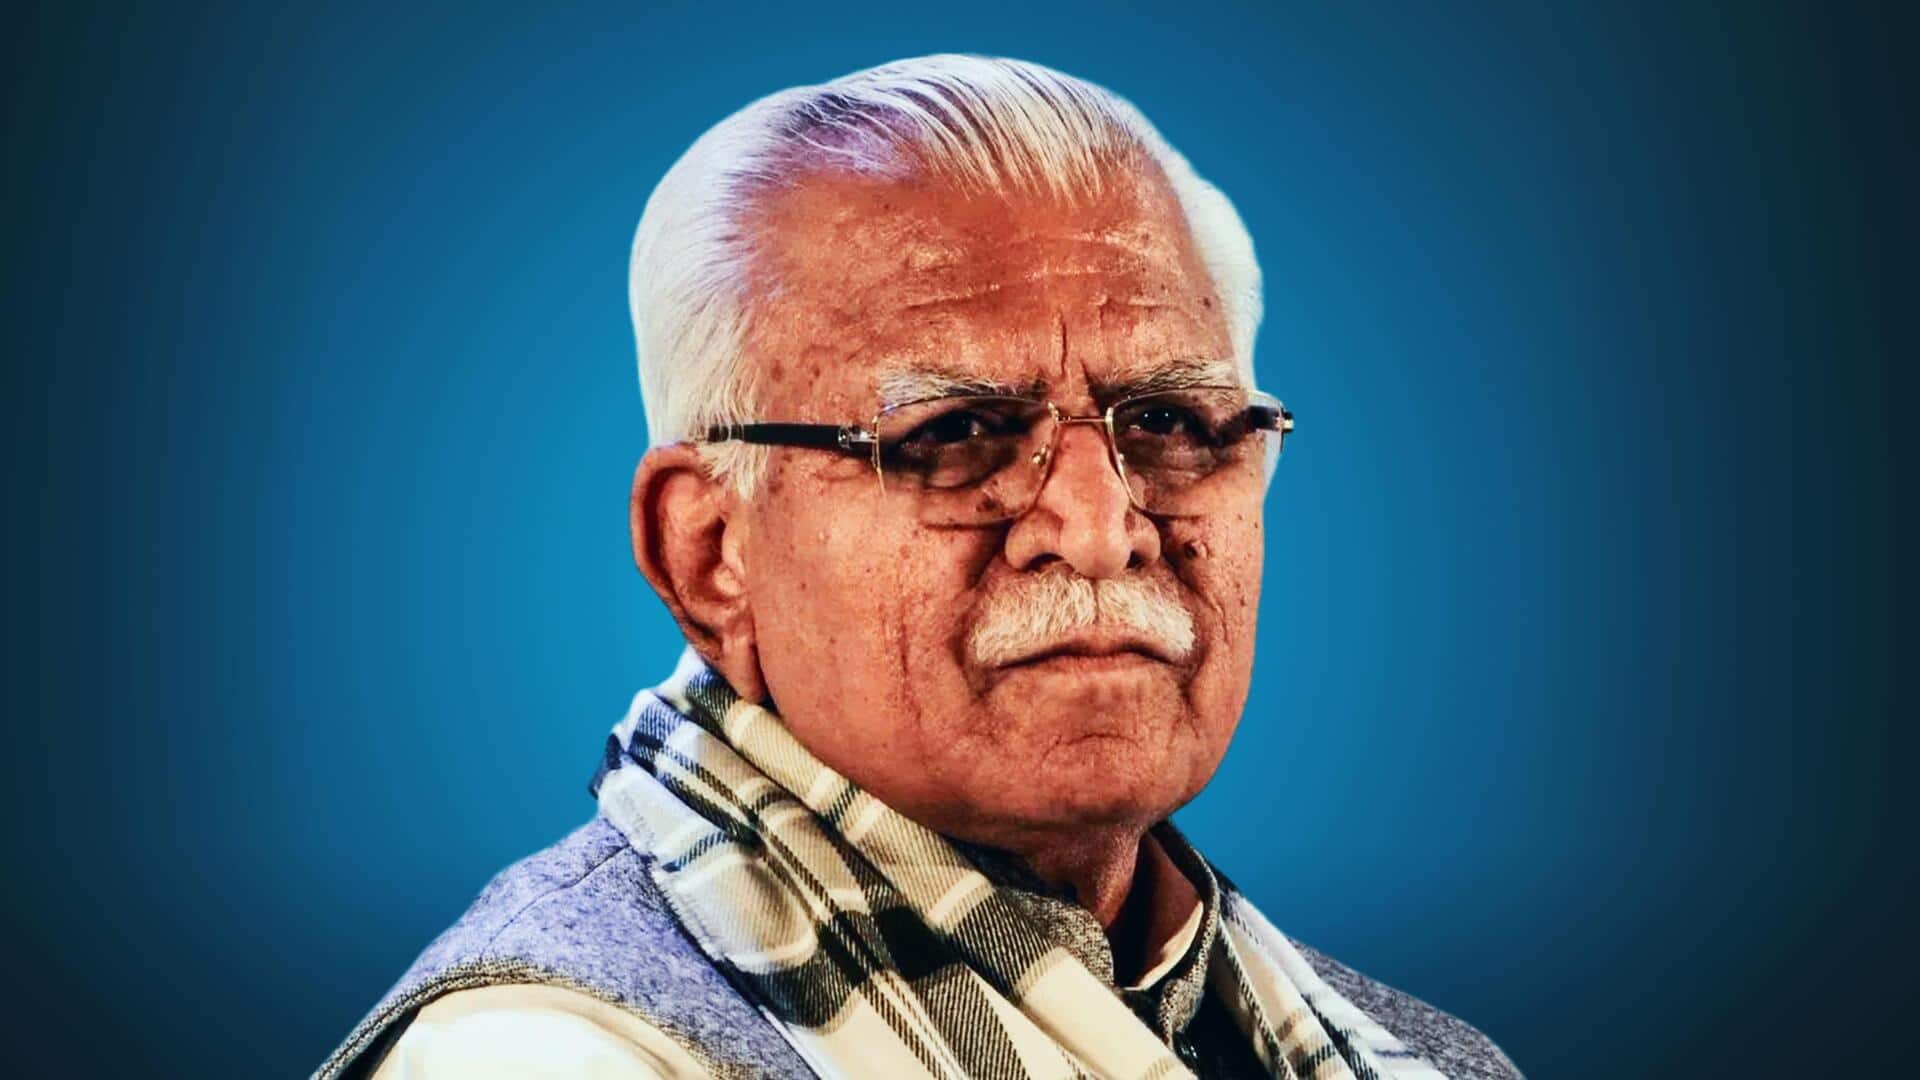 Several MLAs in touch with BJP: Khattar amid Haryana crisis